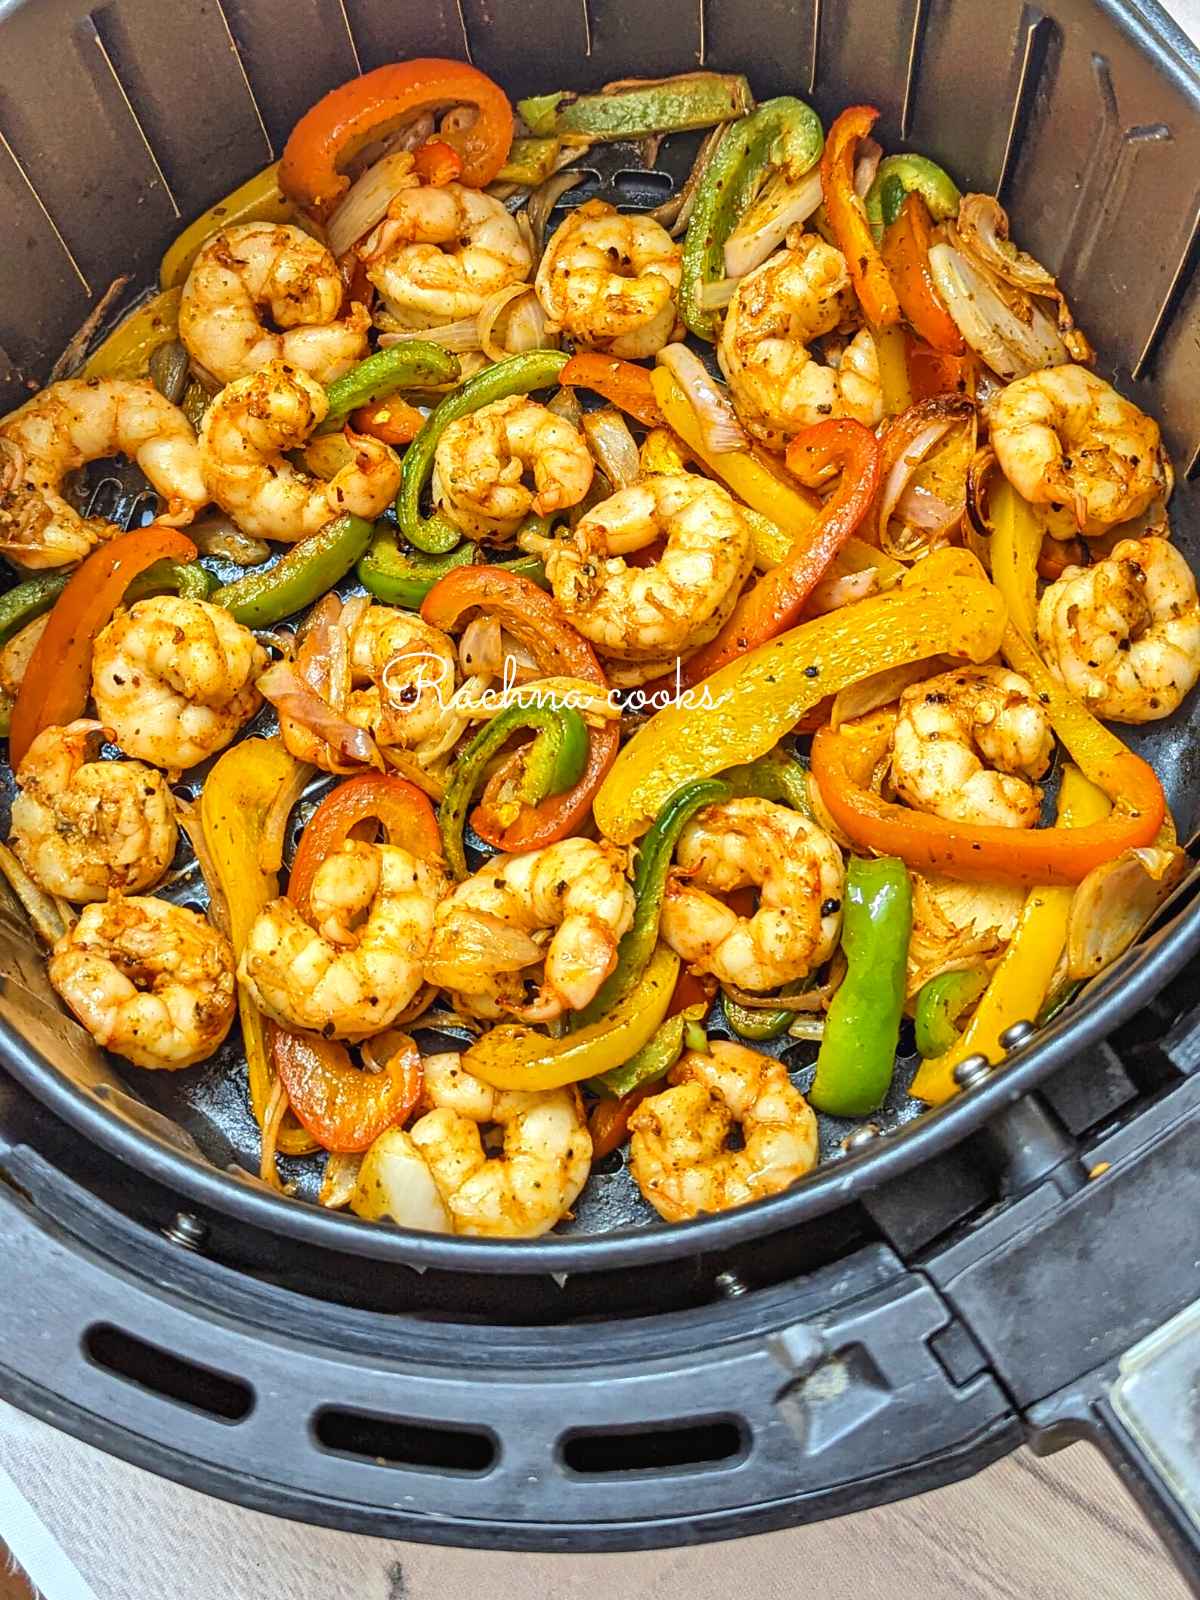 Shrimp and veggies after air frying in air fryer basket.